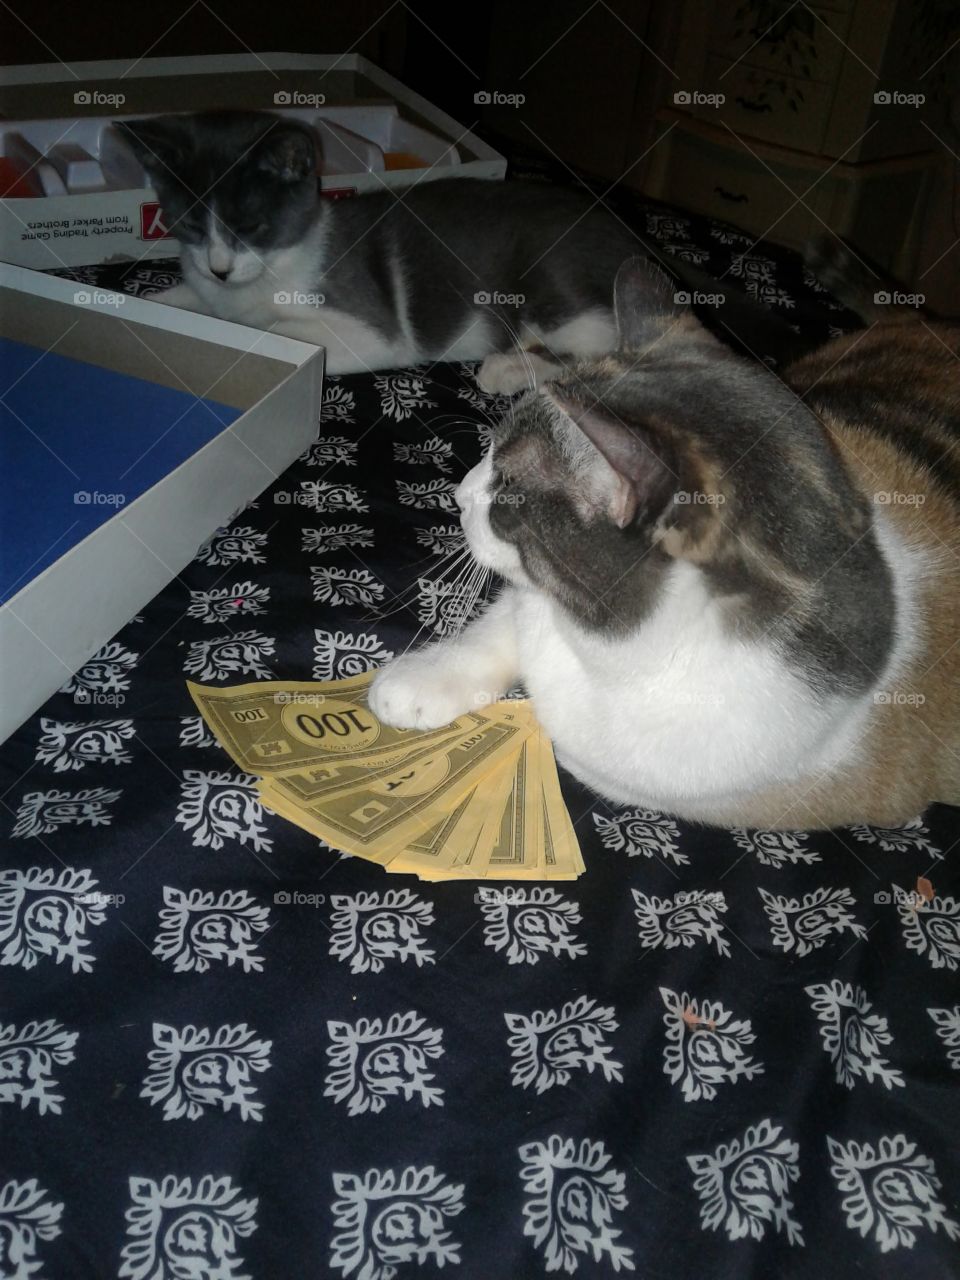 kitty play with Monopoly